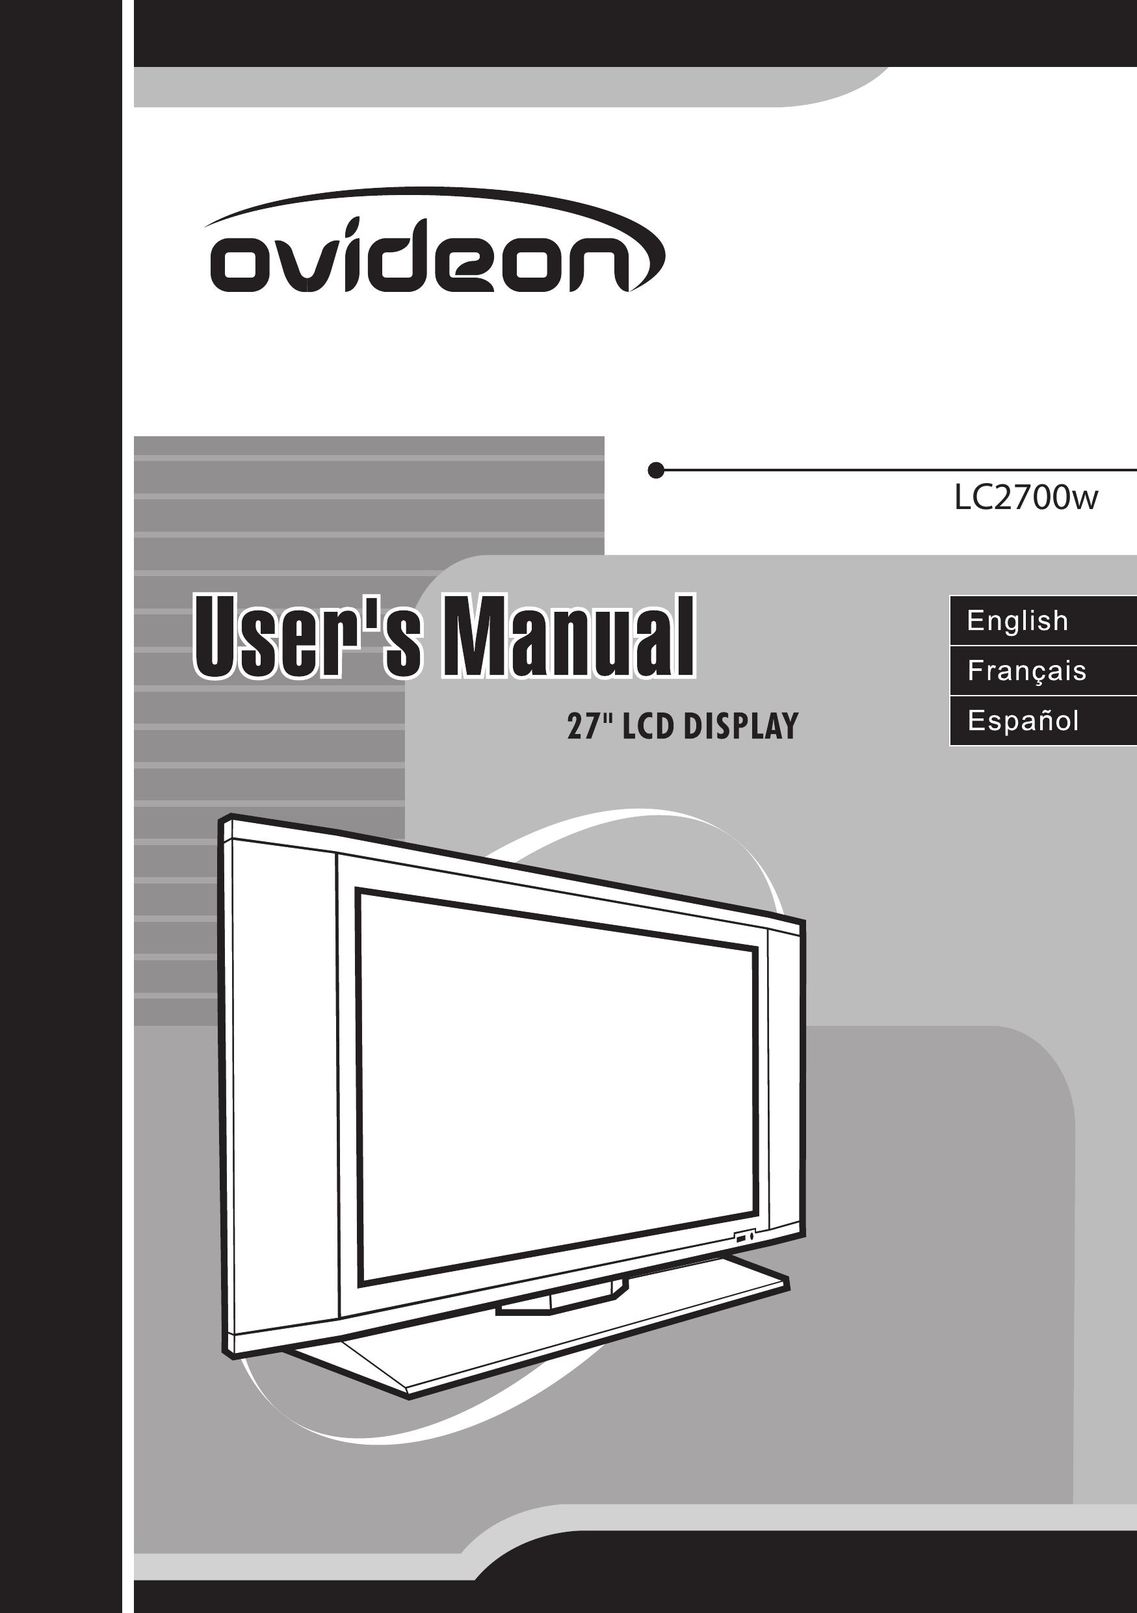 Ovideon LC2700w Flat Panel Television User Manual